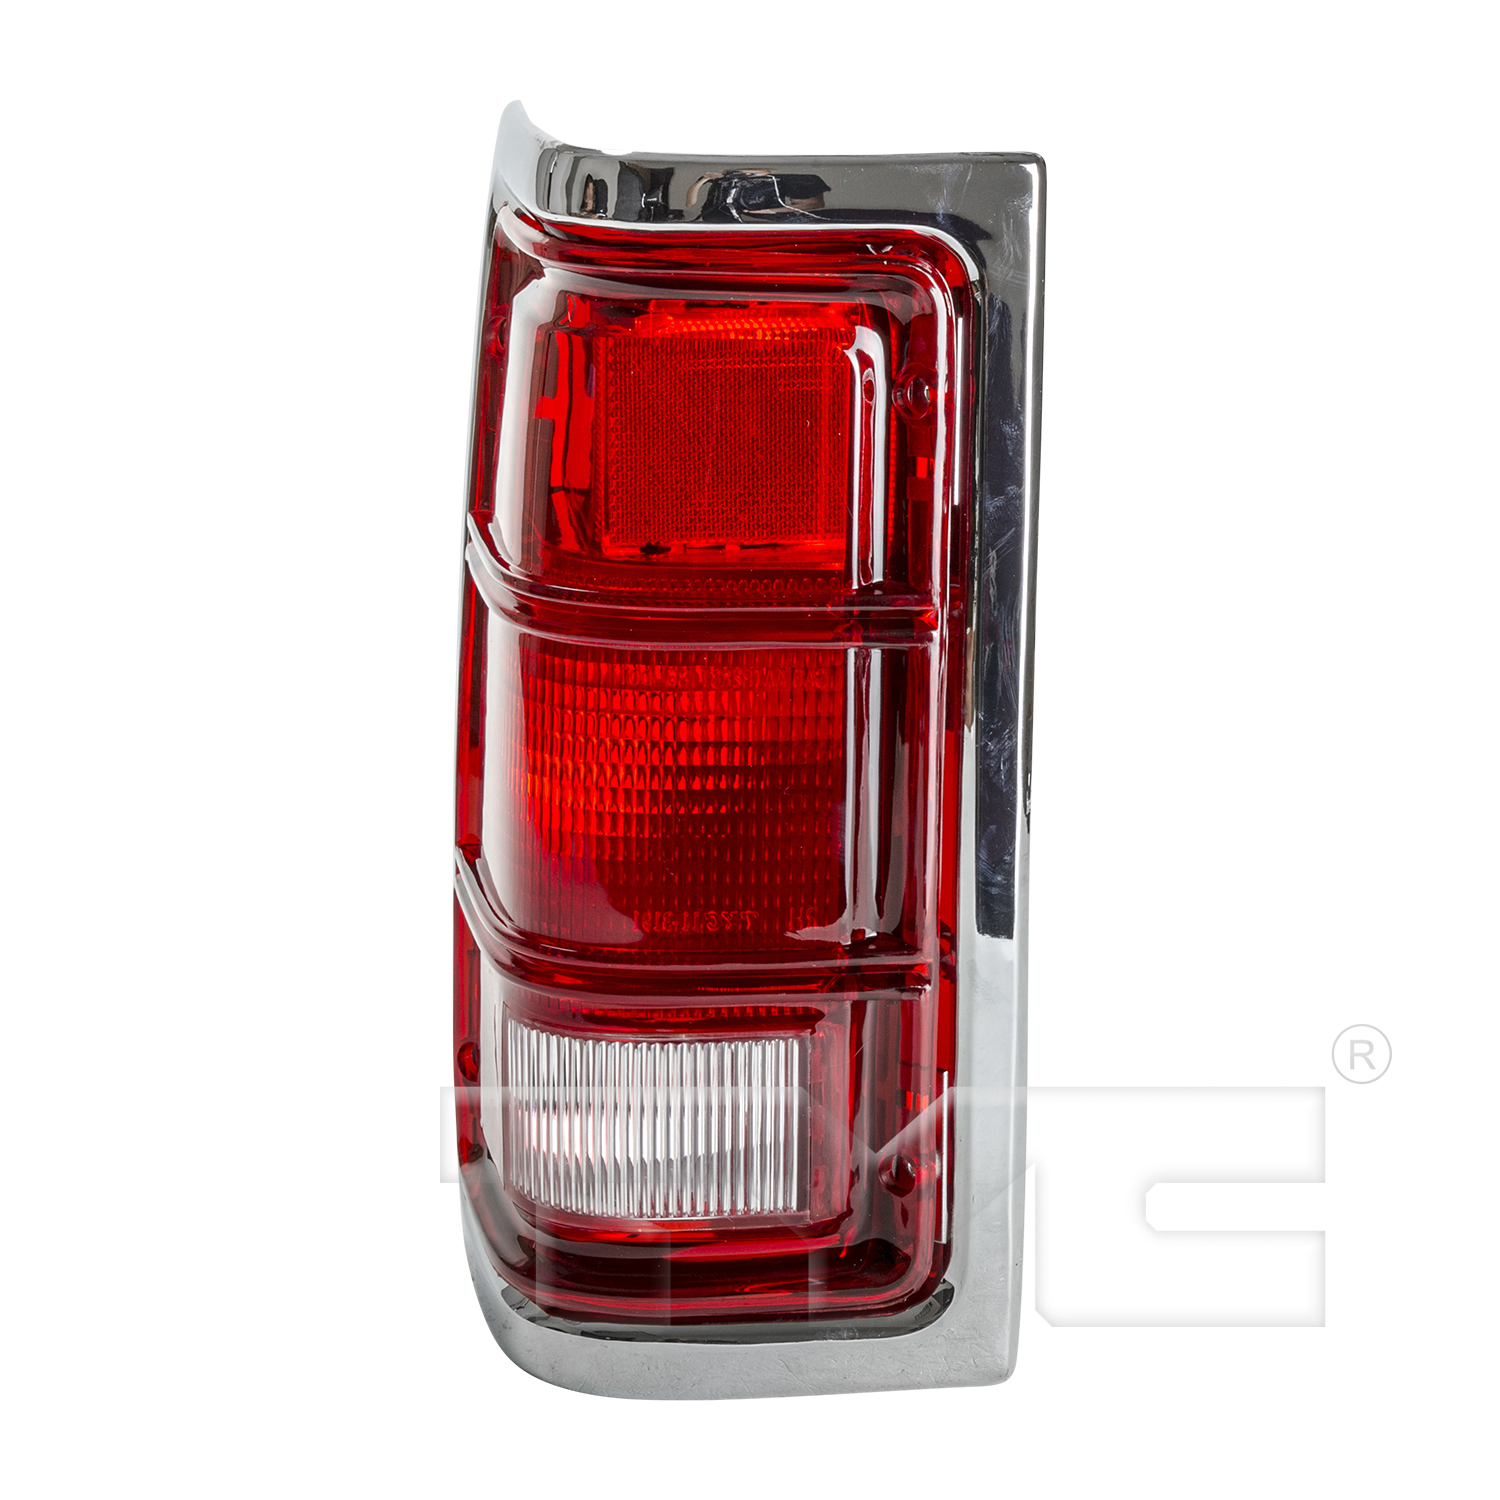 Aftermarket TAILLIGHTS for DODGE - W150, W150,87-91,LT Taillamp lens